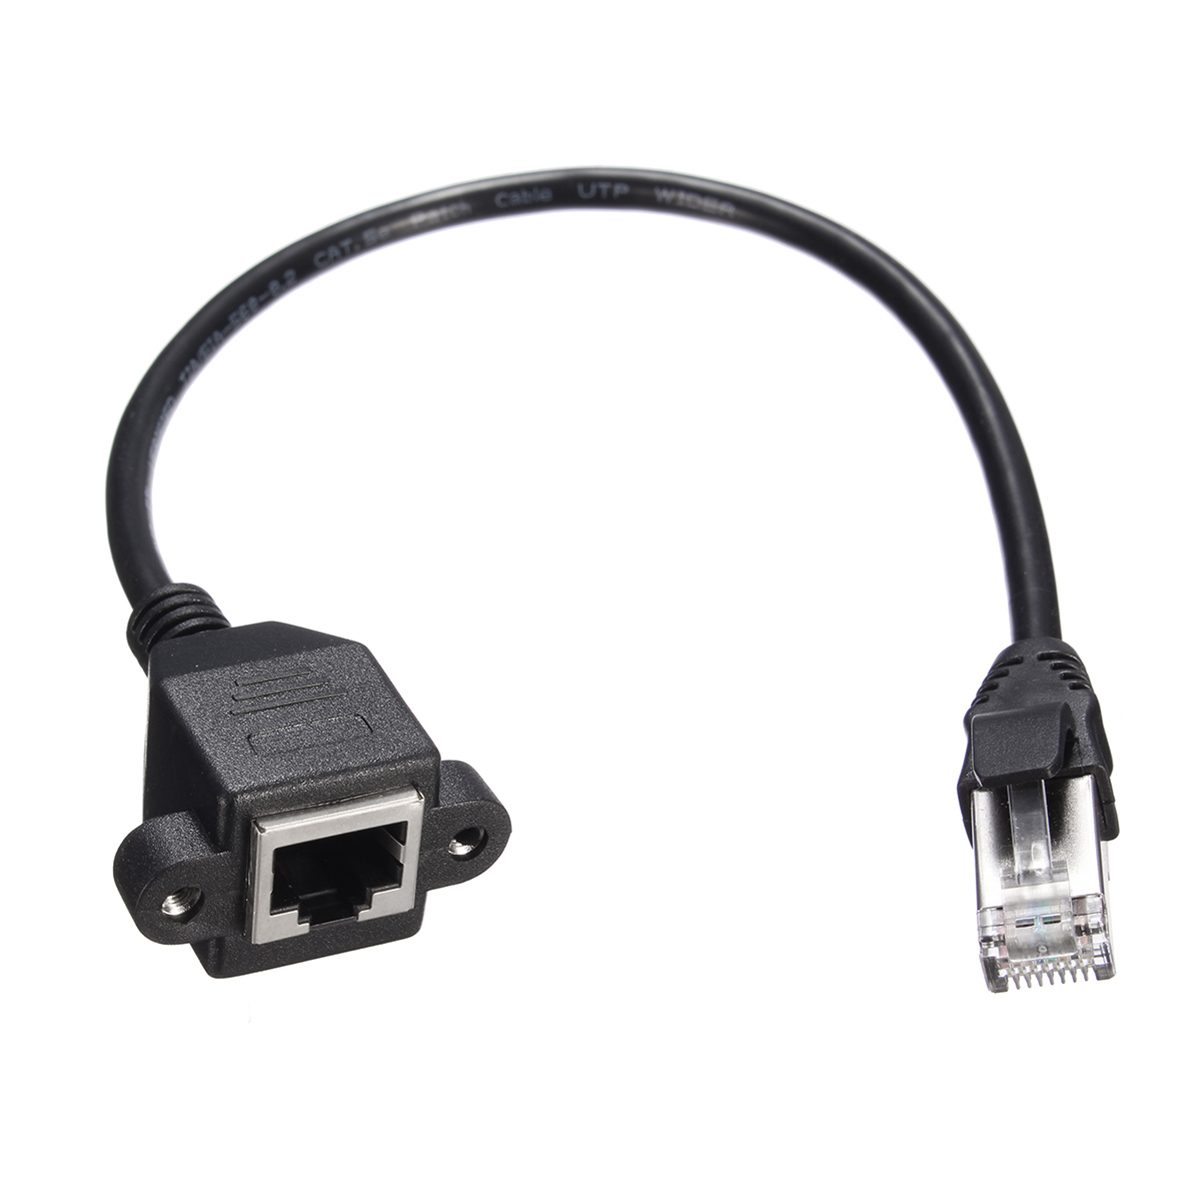 30cm/1M RJ45 Cable Male to Female Screw Panel Mount Ethernet LAN Network Extension Cable 61